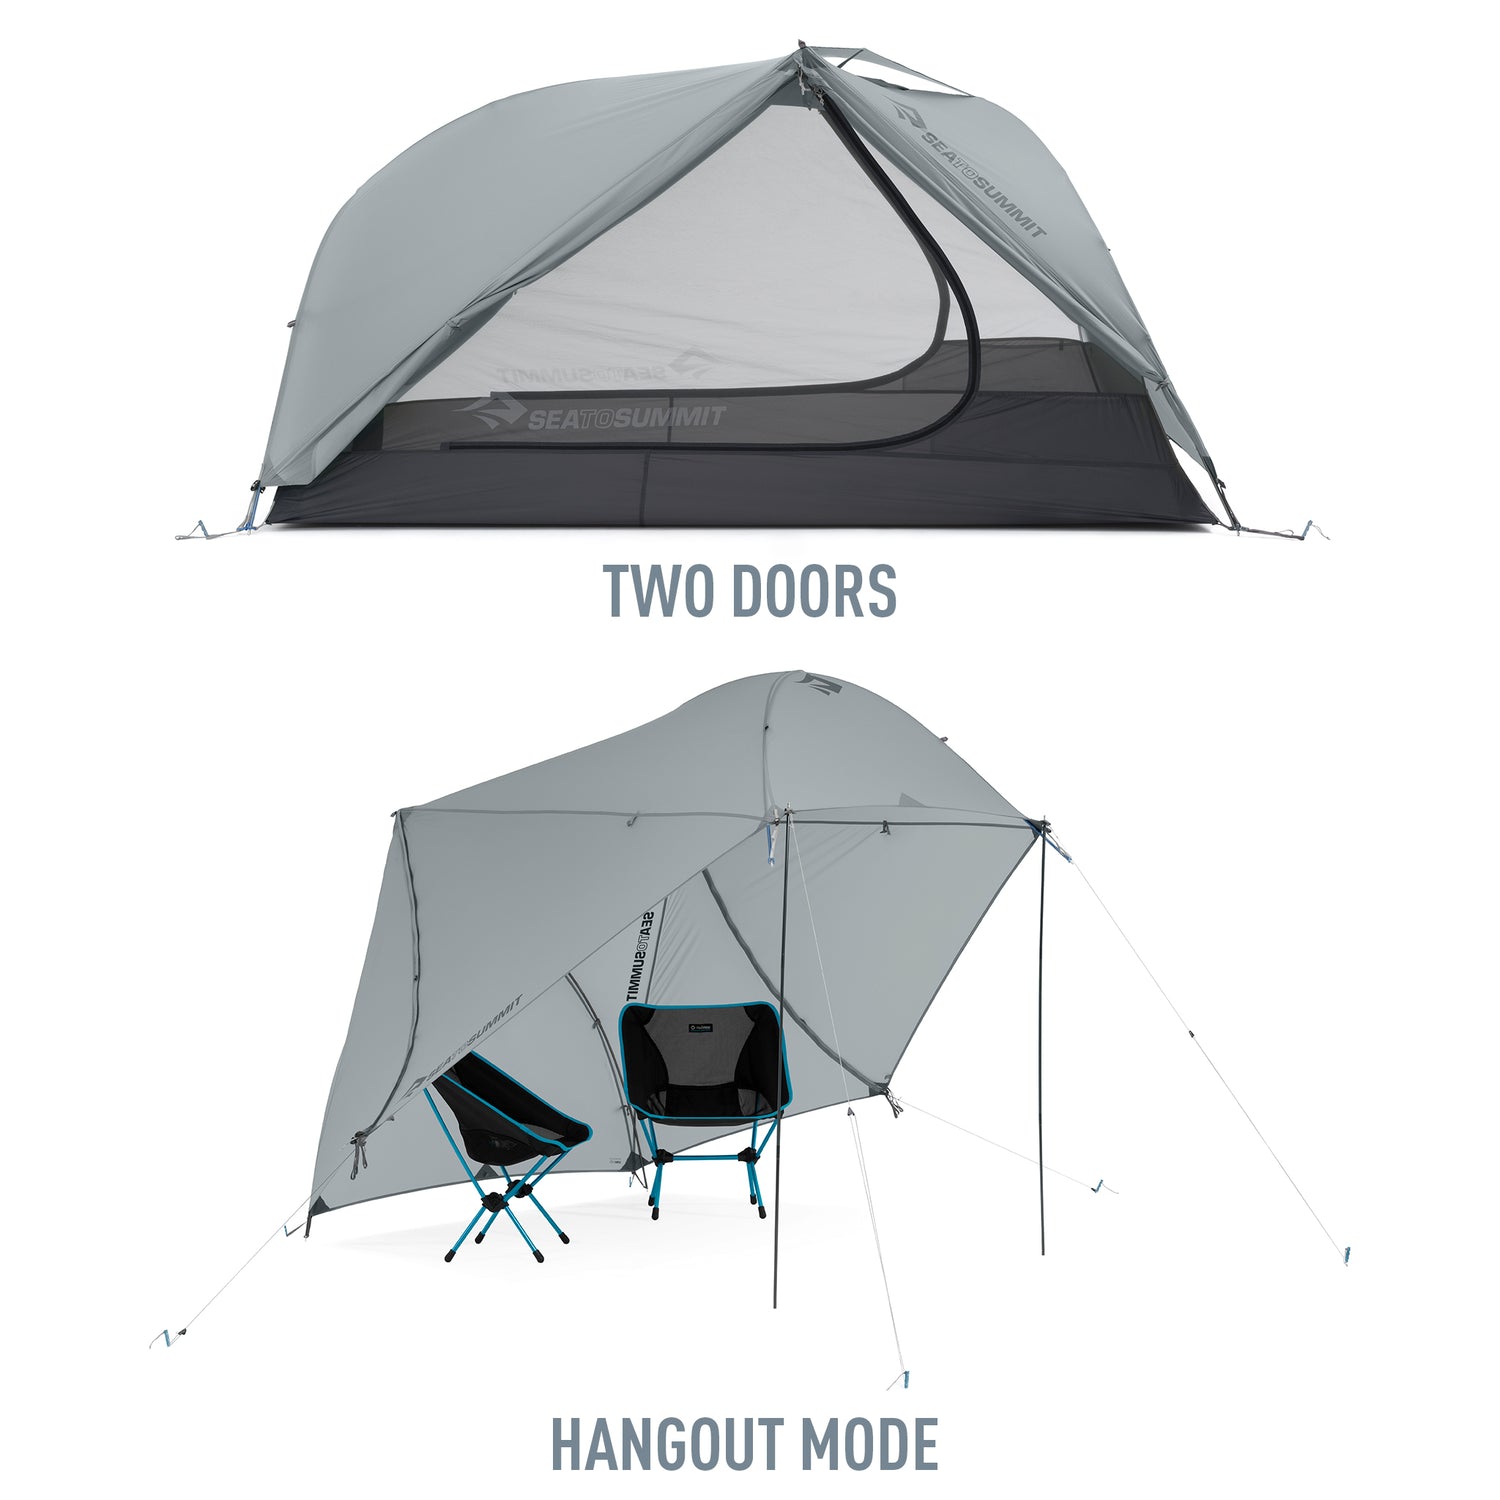 Field Tested Tent Review: Sea To Summit Telos TR2 